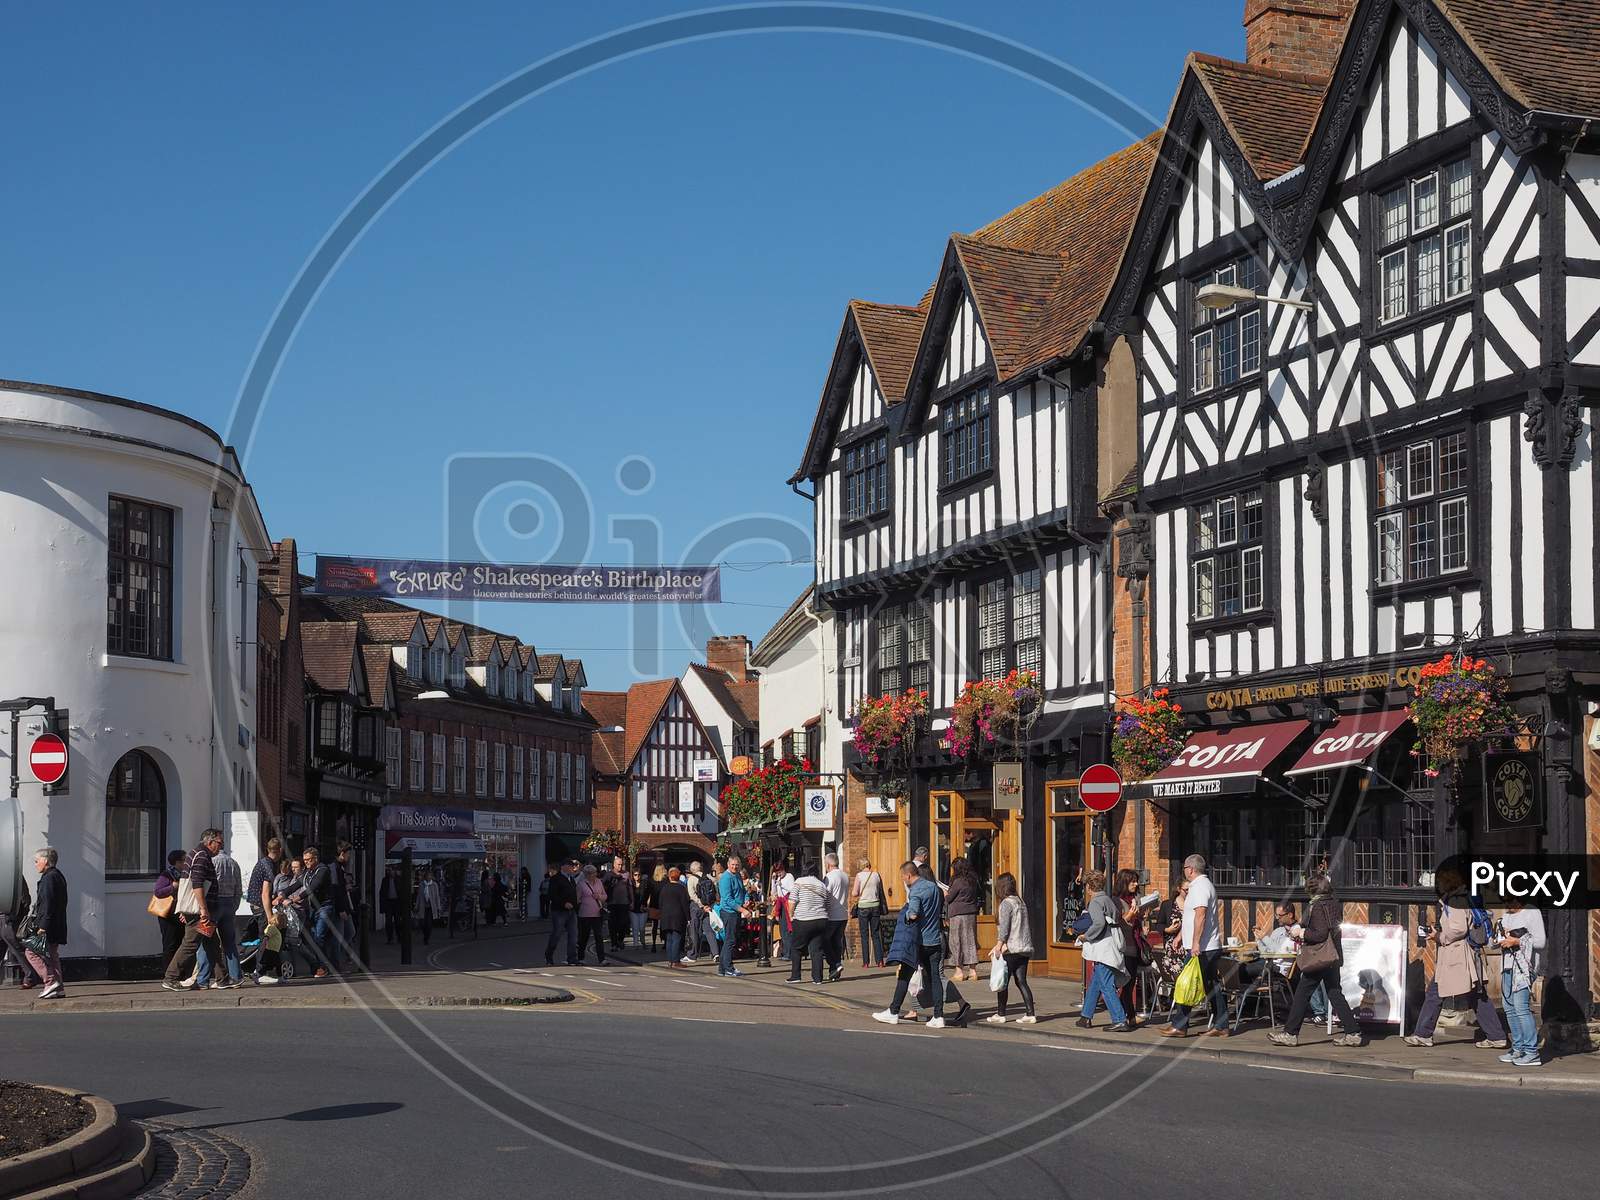 Stratford Upon Avon, Uk - September 26, 2015: Tourists Visiting The City Of Stratford, Birthplace Of William Shakespeare